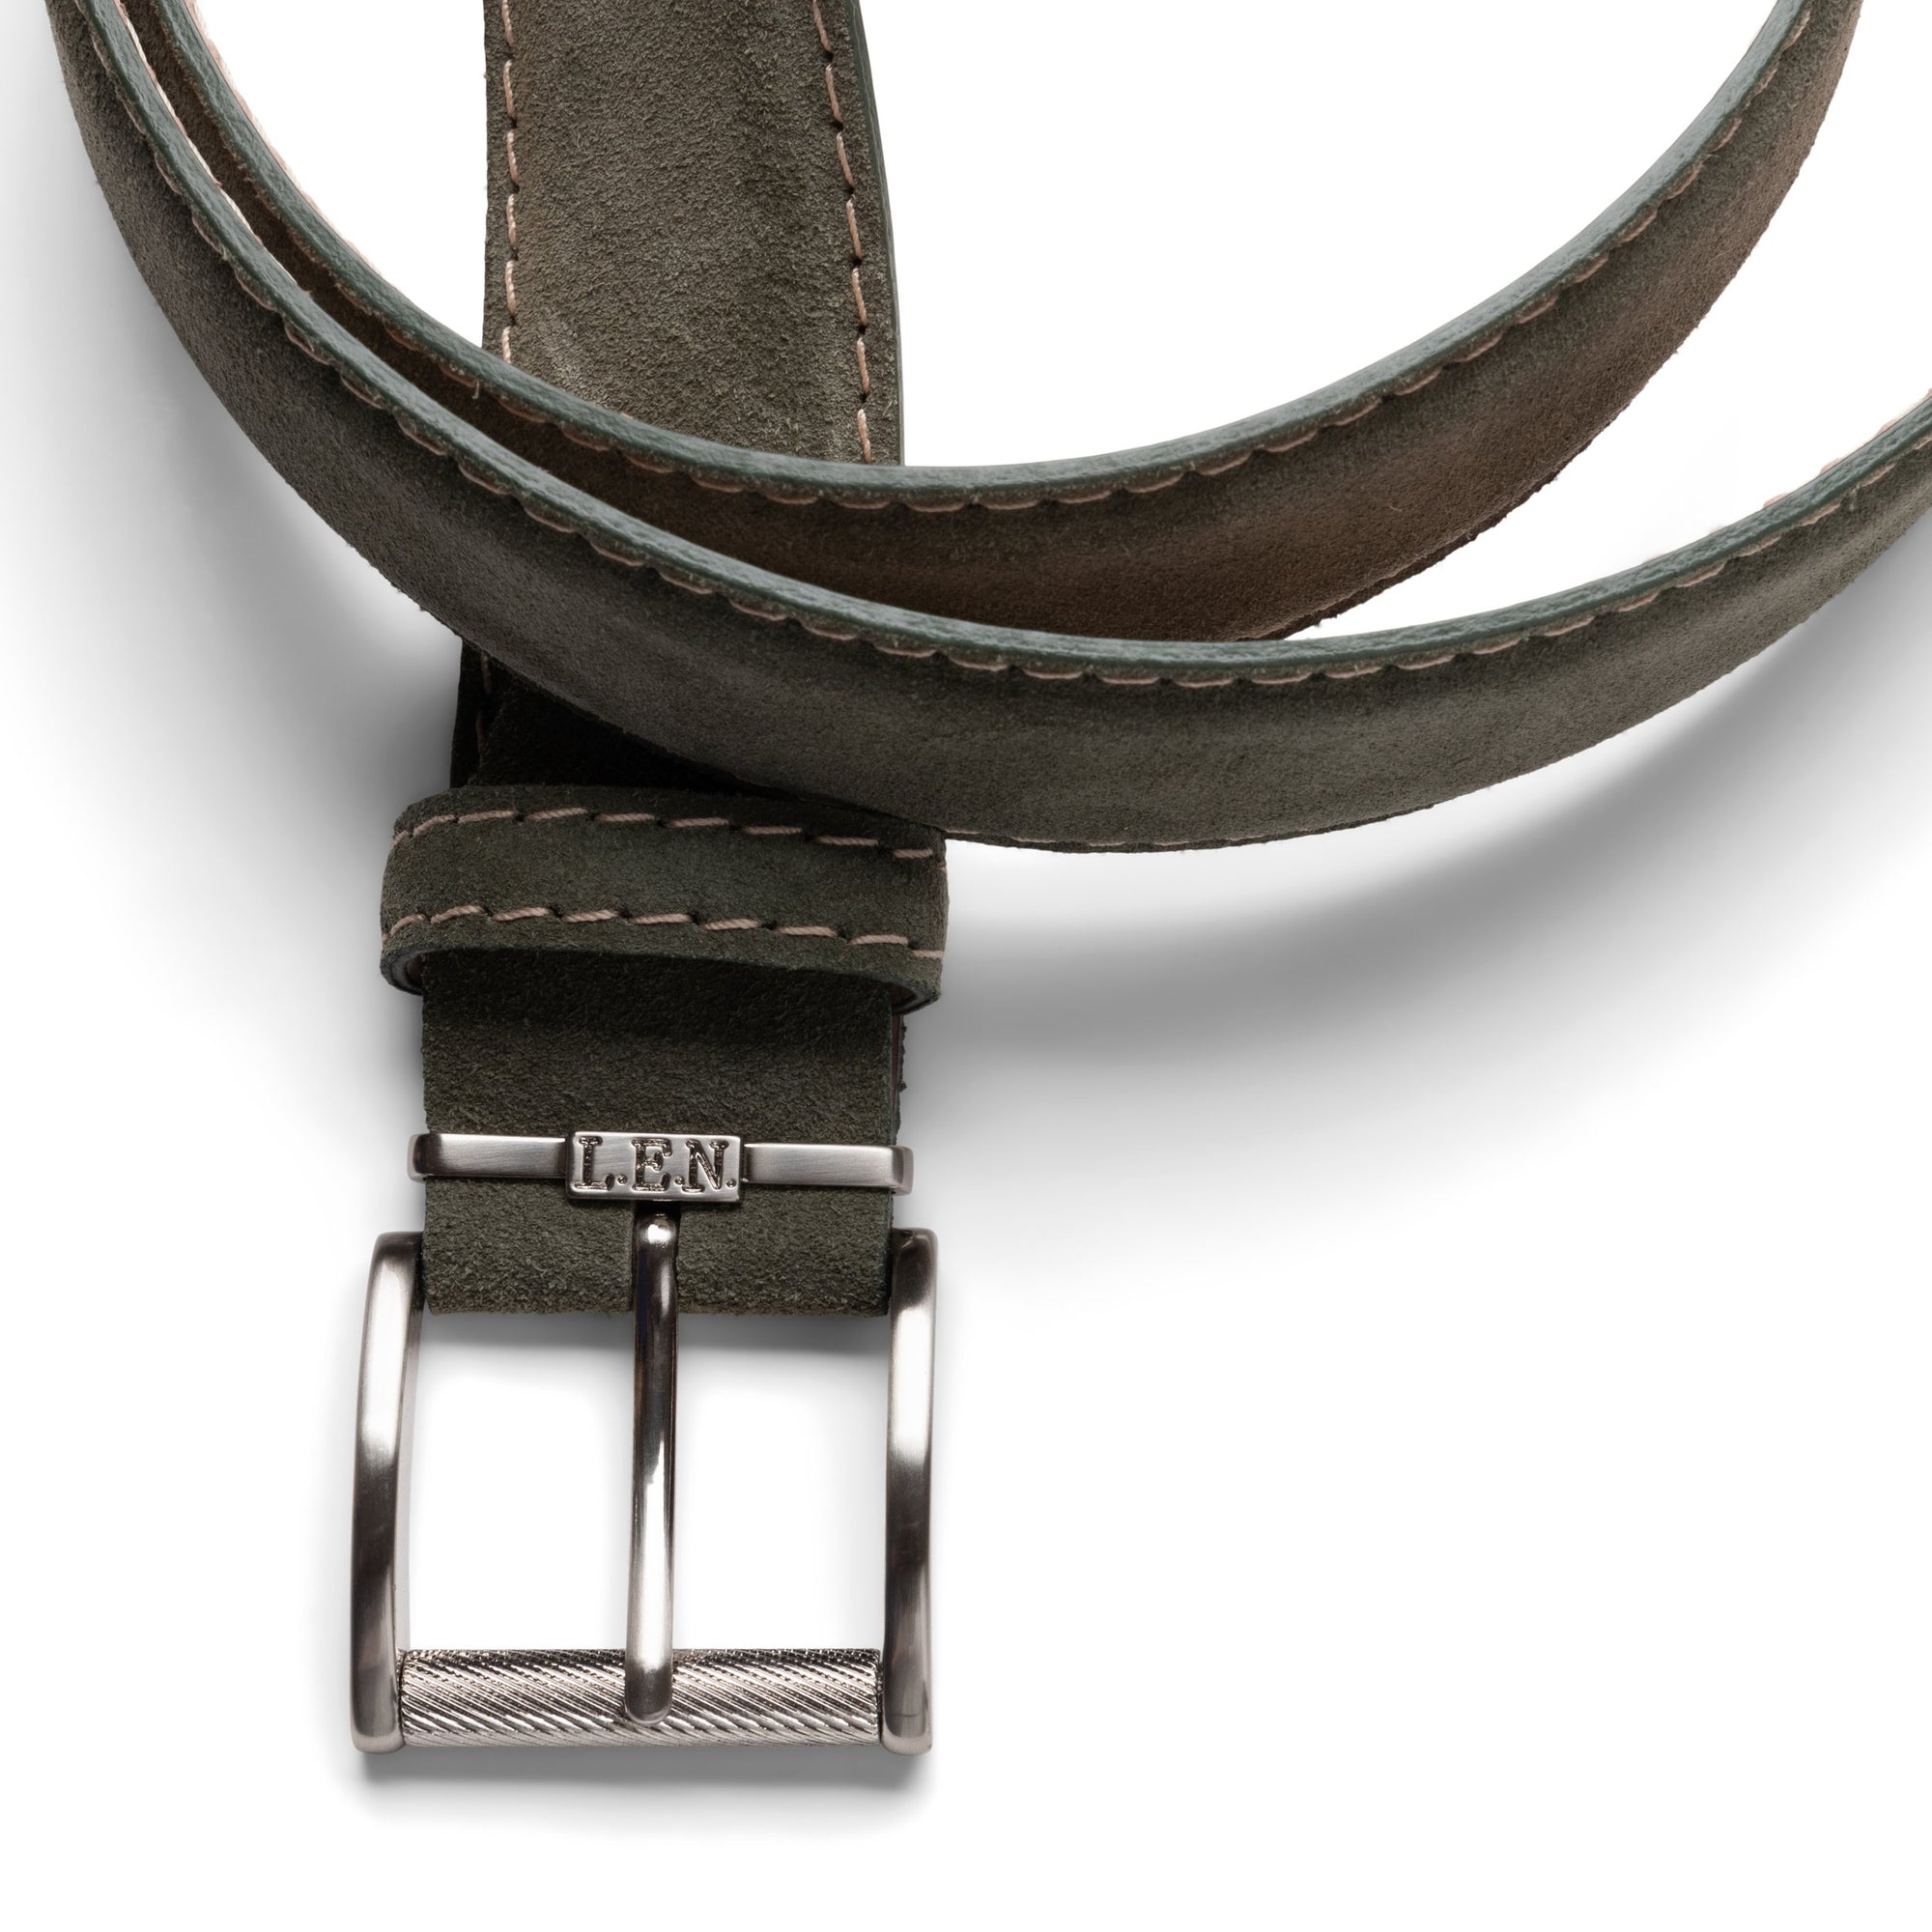 Italian Suede Belt in Olive with Vegetable Stitching by L.E.N. Bespoke